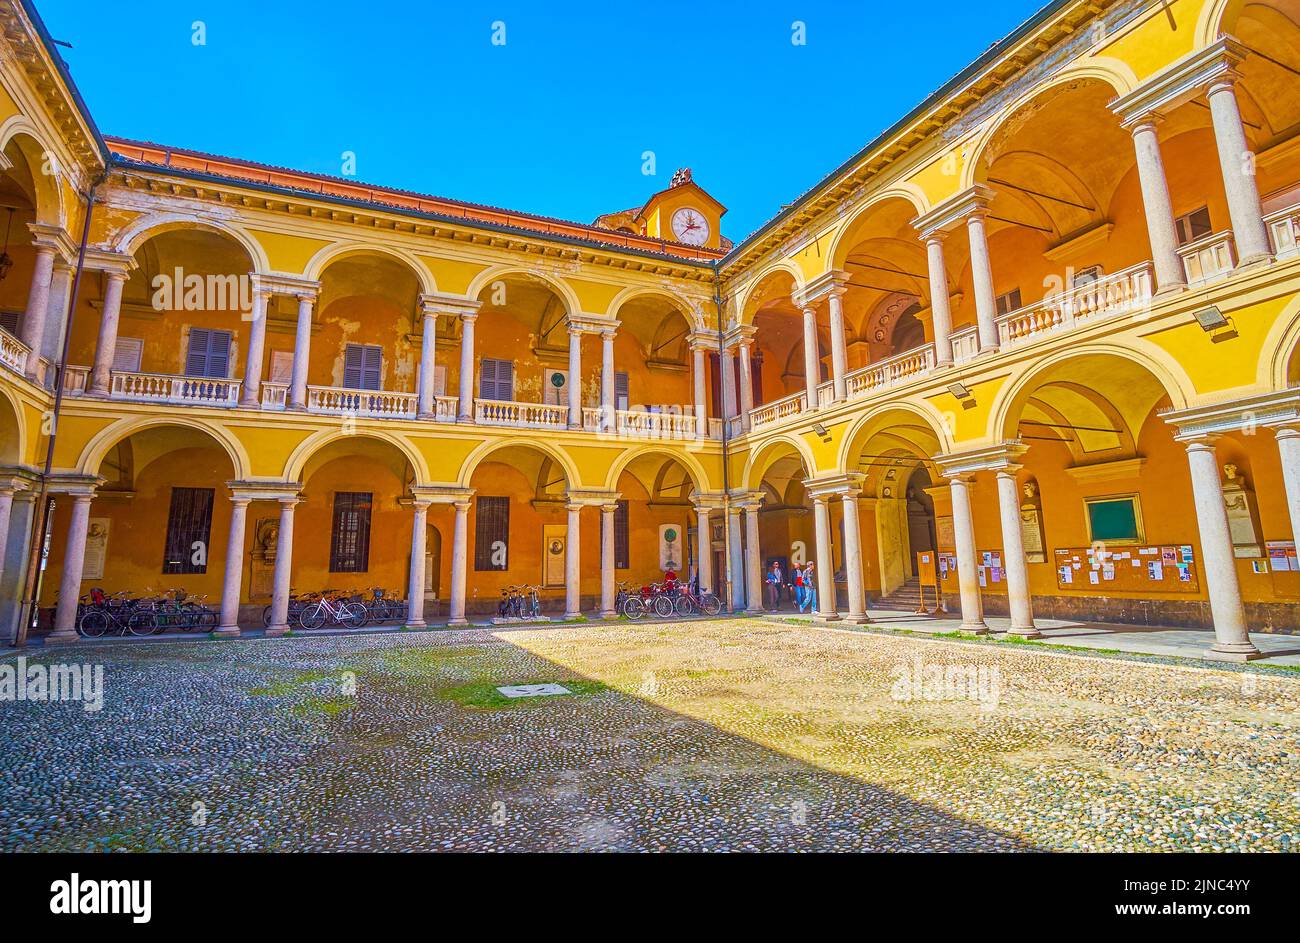 PAVIA, ITALY - APRIL 9, 2022: One of the courtyards of University of Pavia, decorated with colonnades, on April 9 in Pavia, Italy Stock Photo